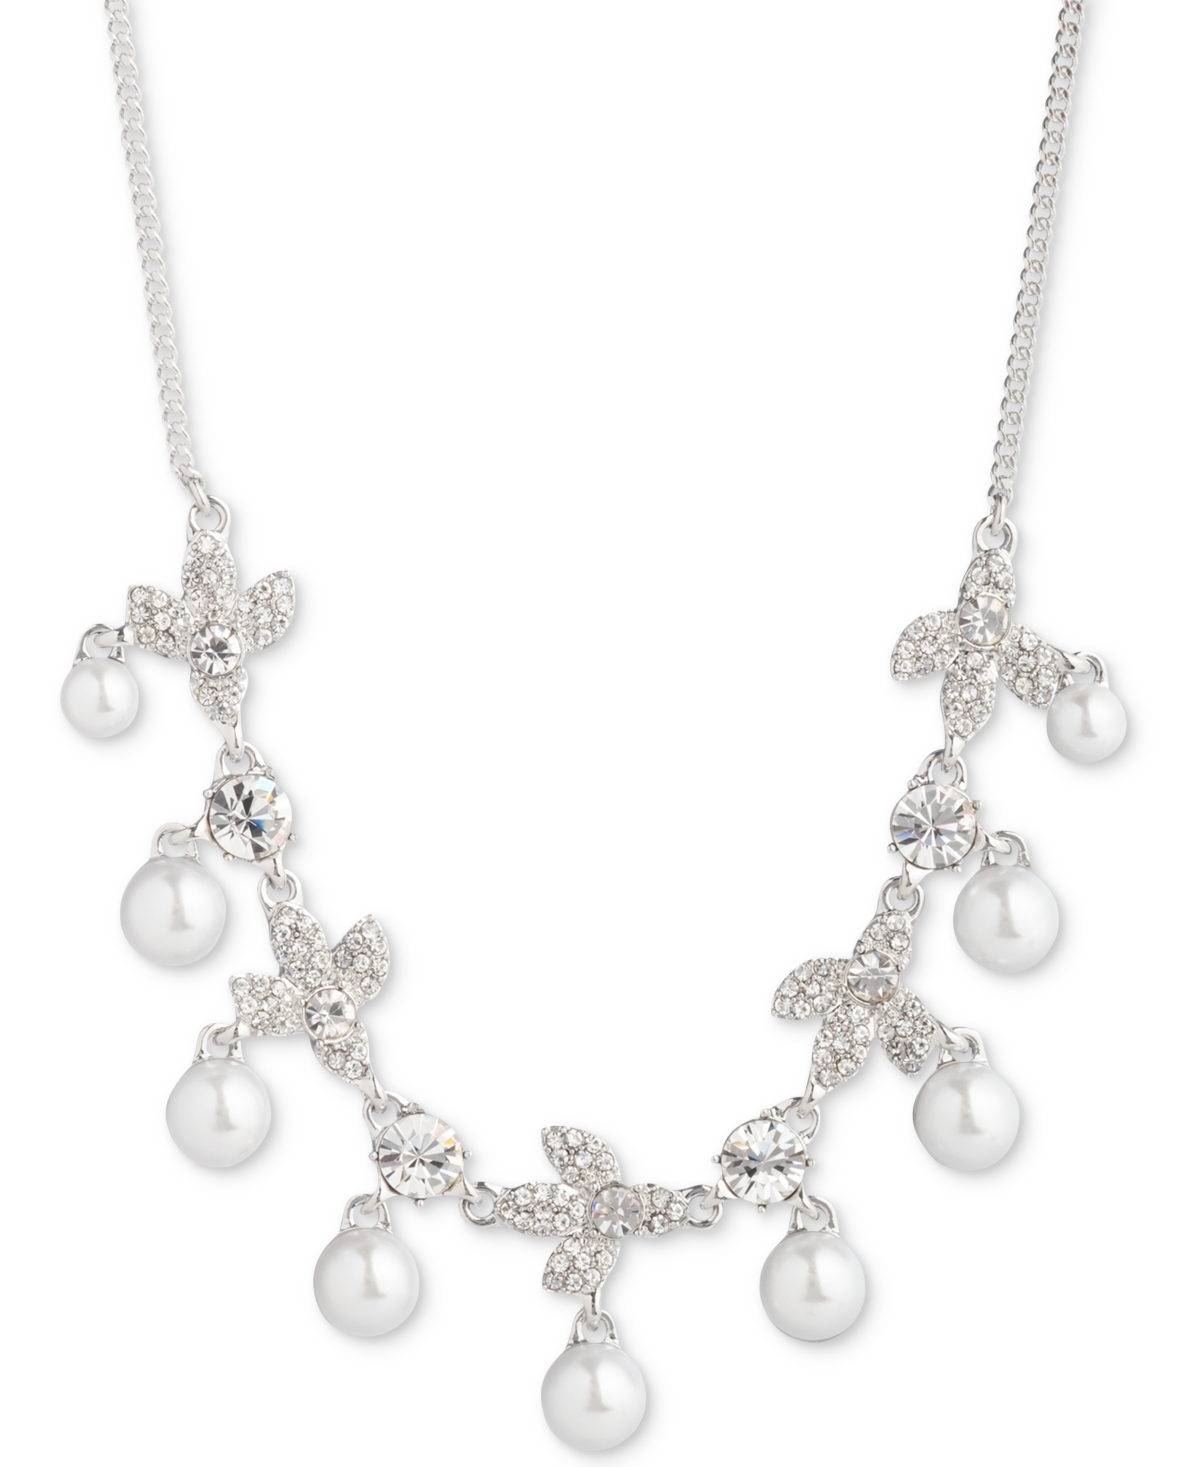 Silver-Tone Crystal & Imitation Pearl Statement Necklace, 16" + 3" extender - White